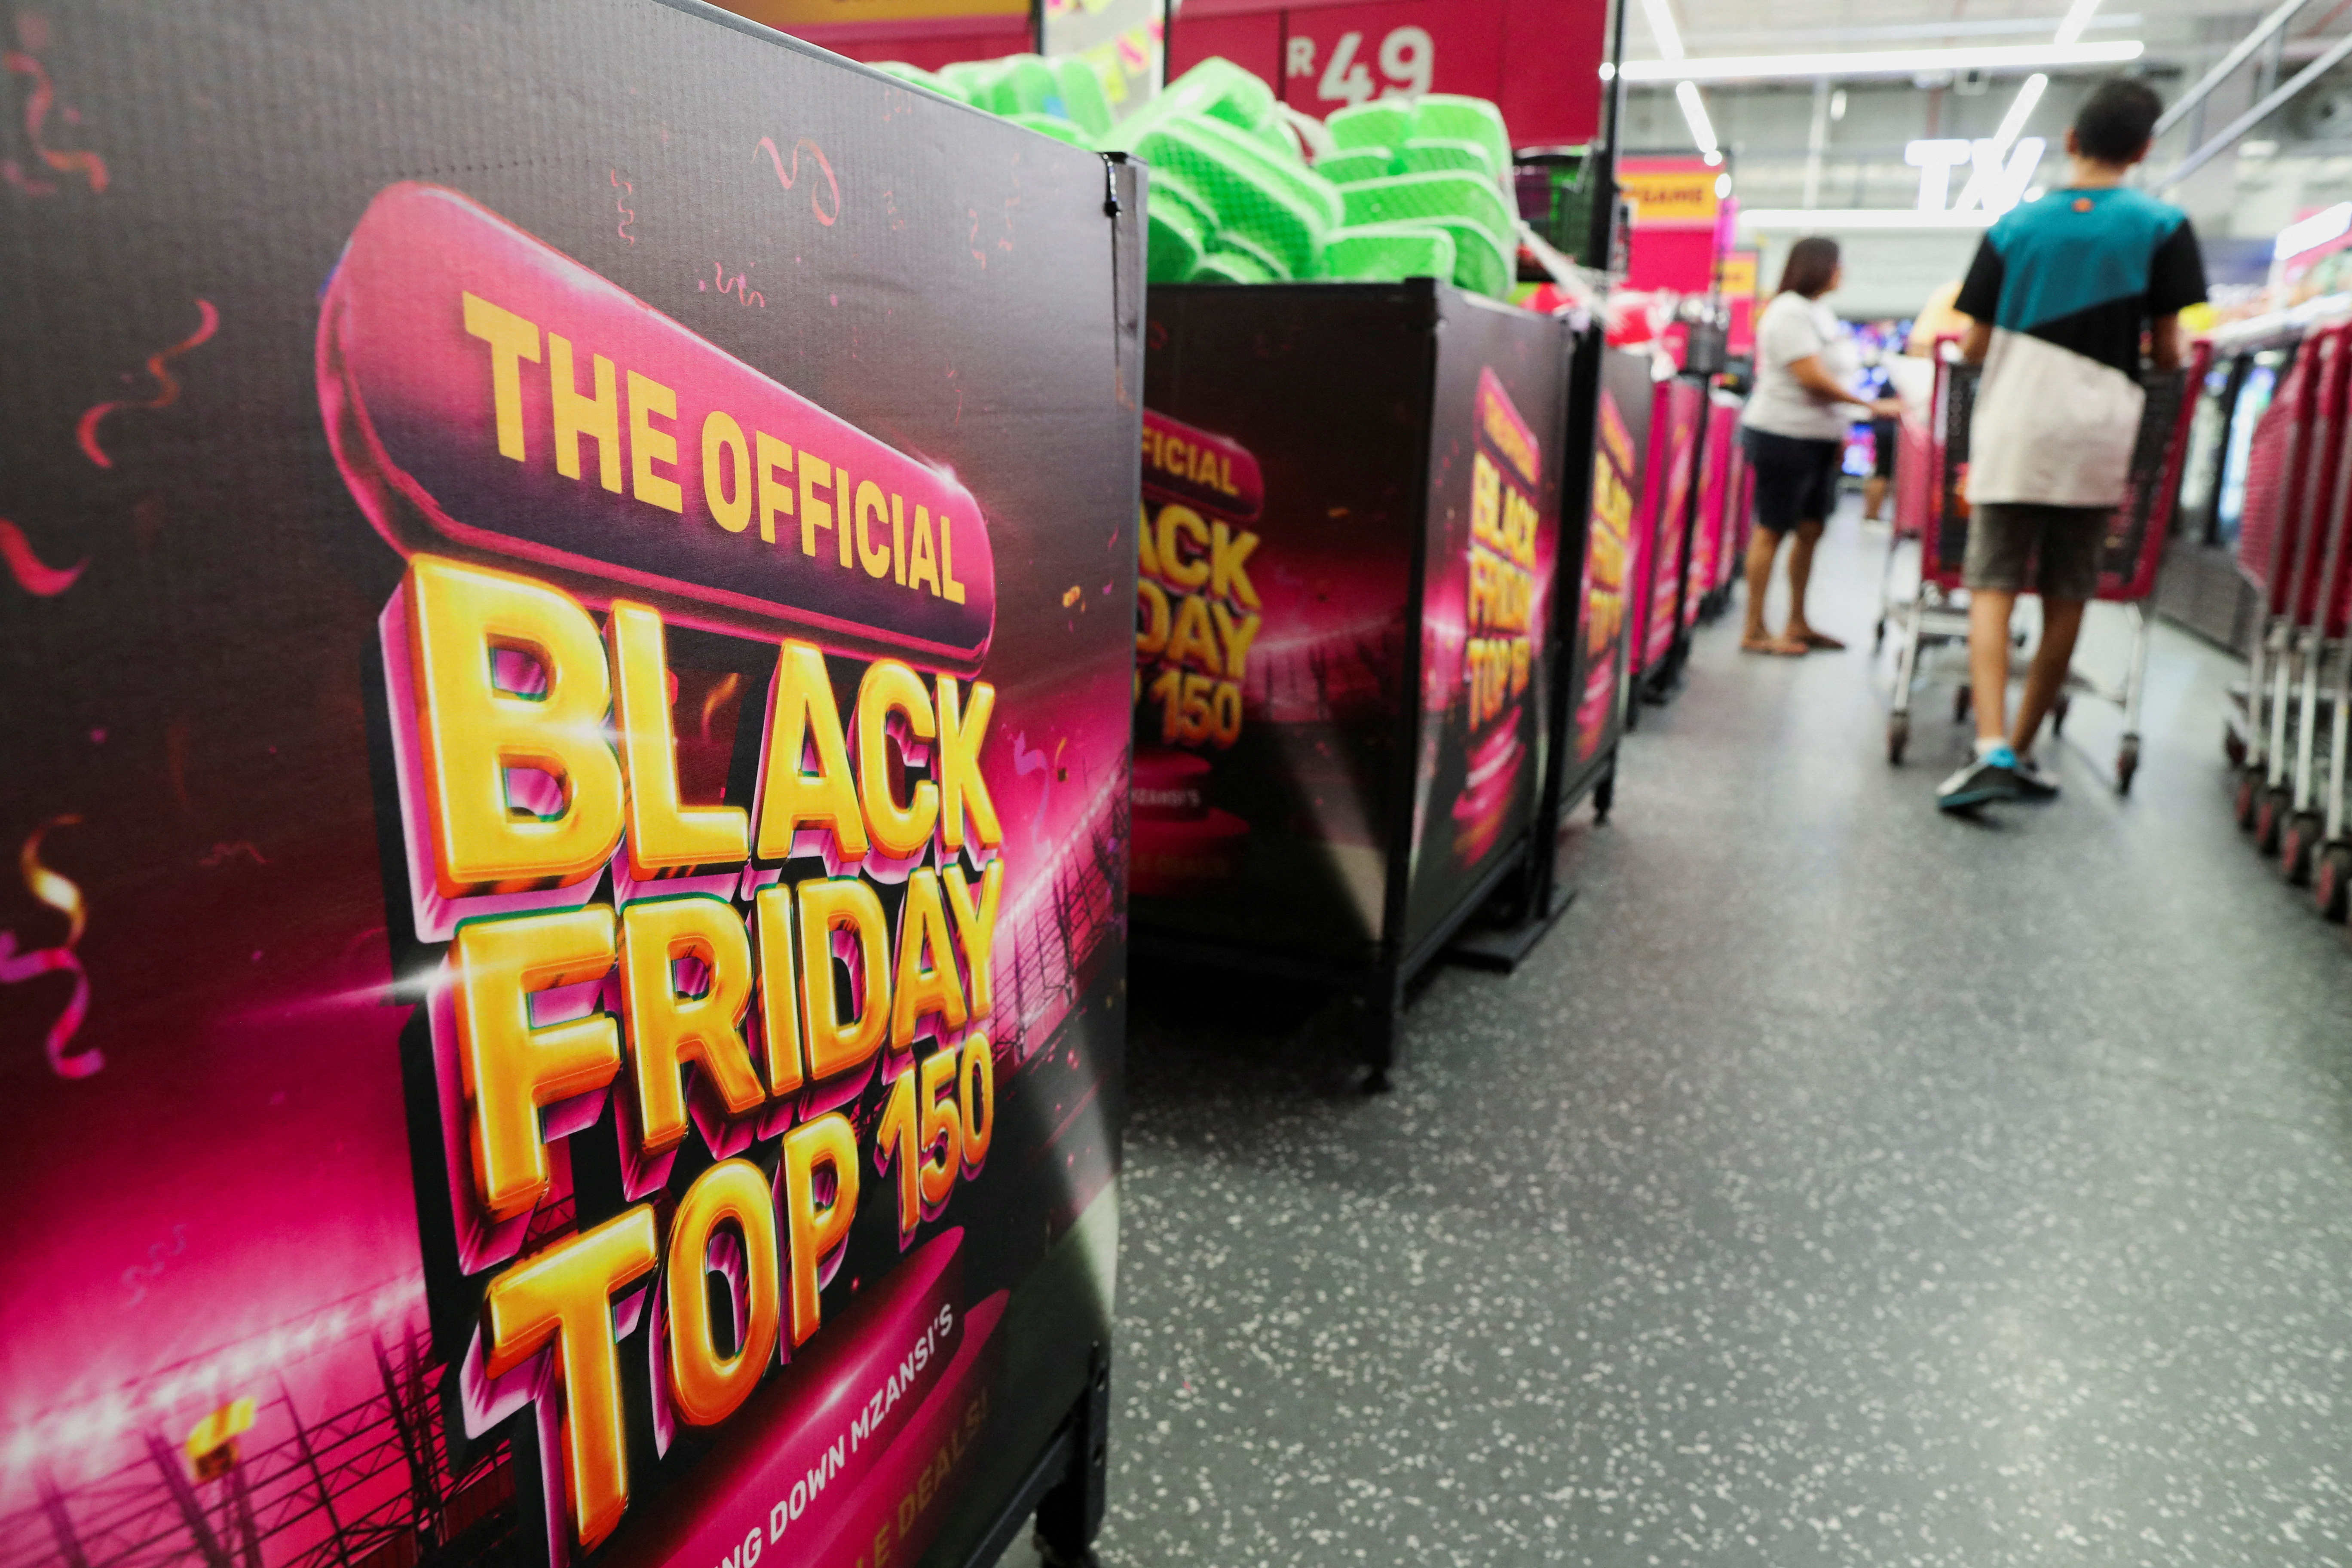 Black Friday signage is displayed at Game store in Johannesburg